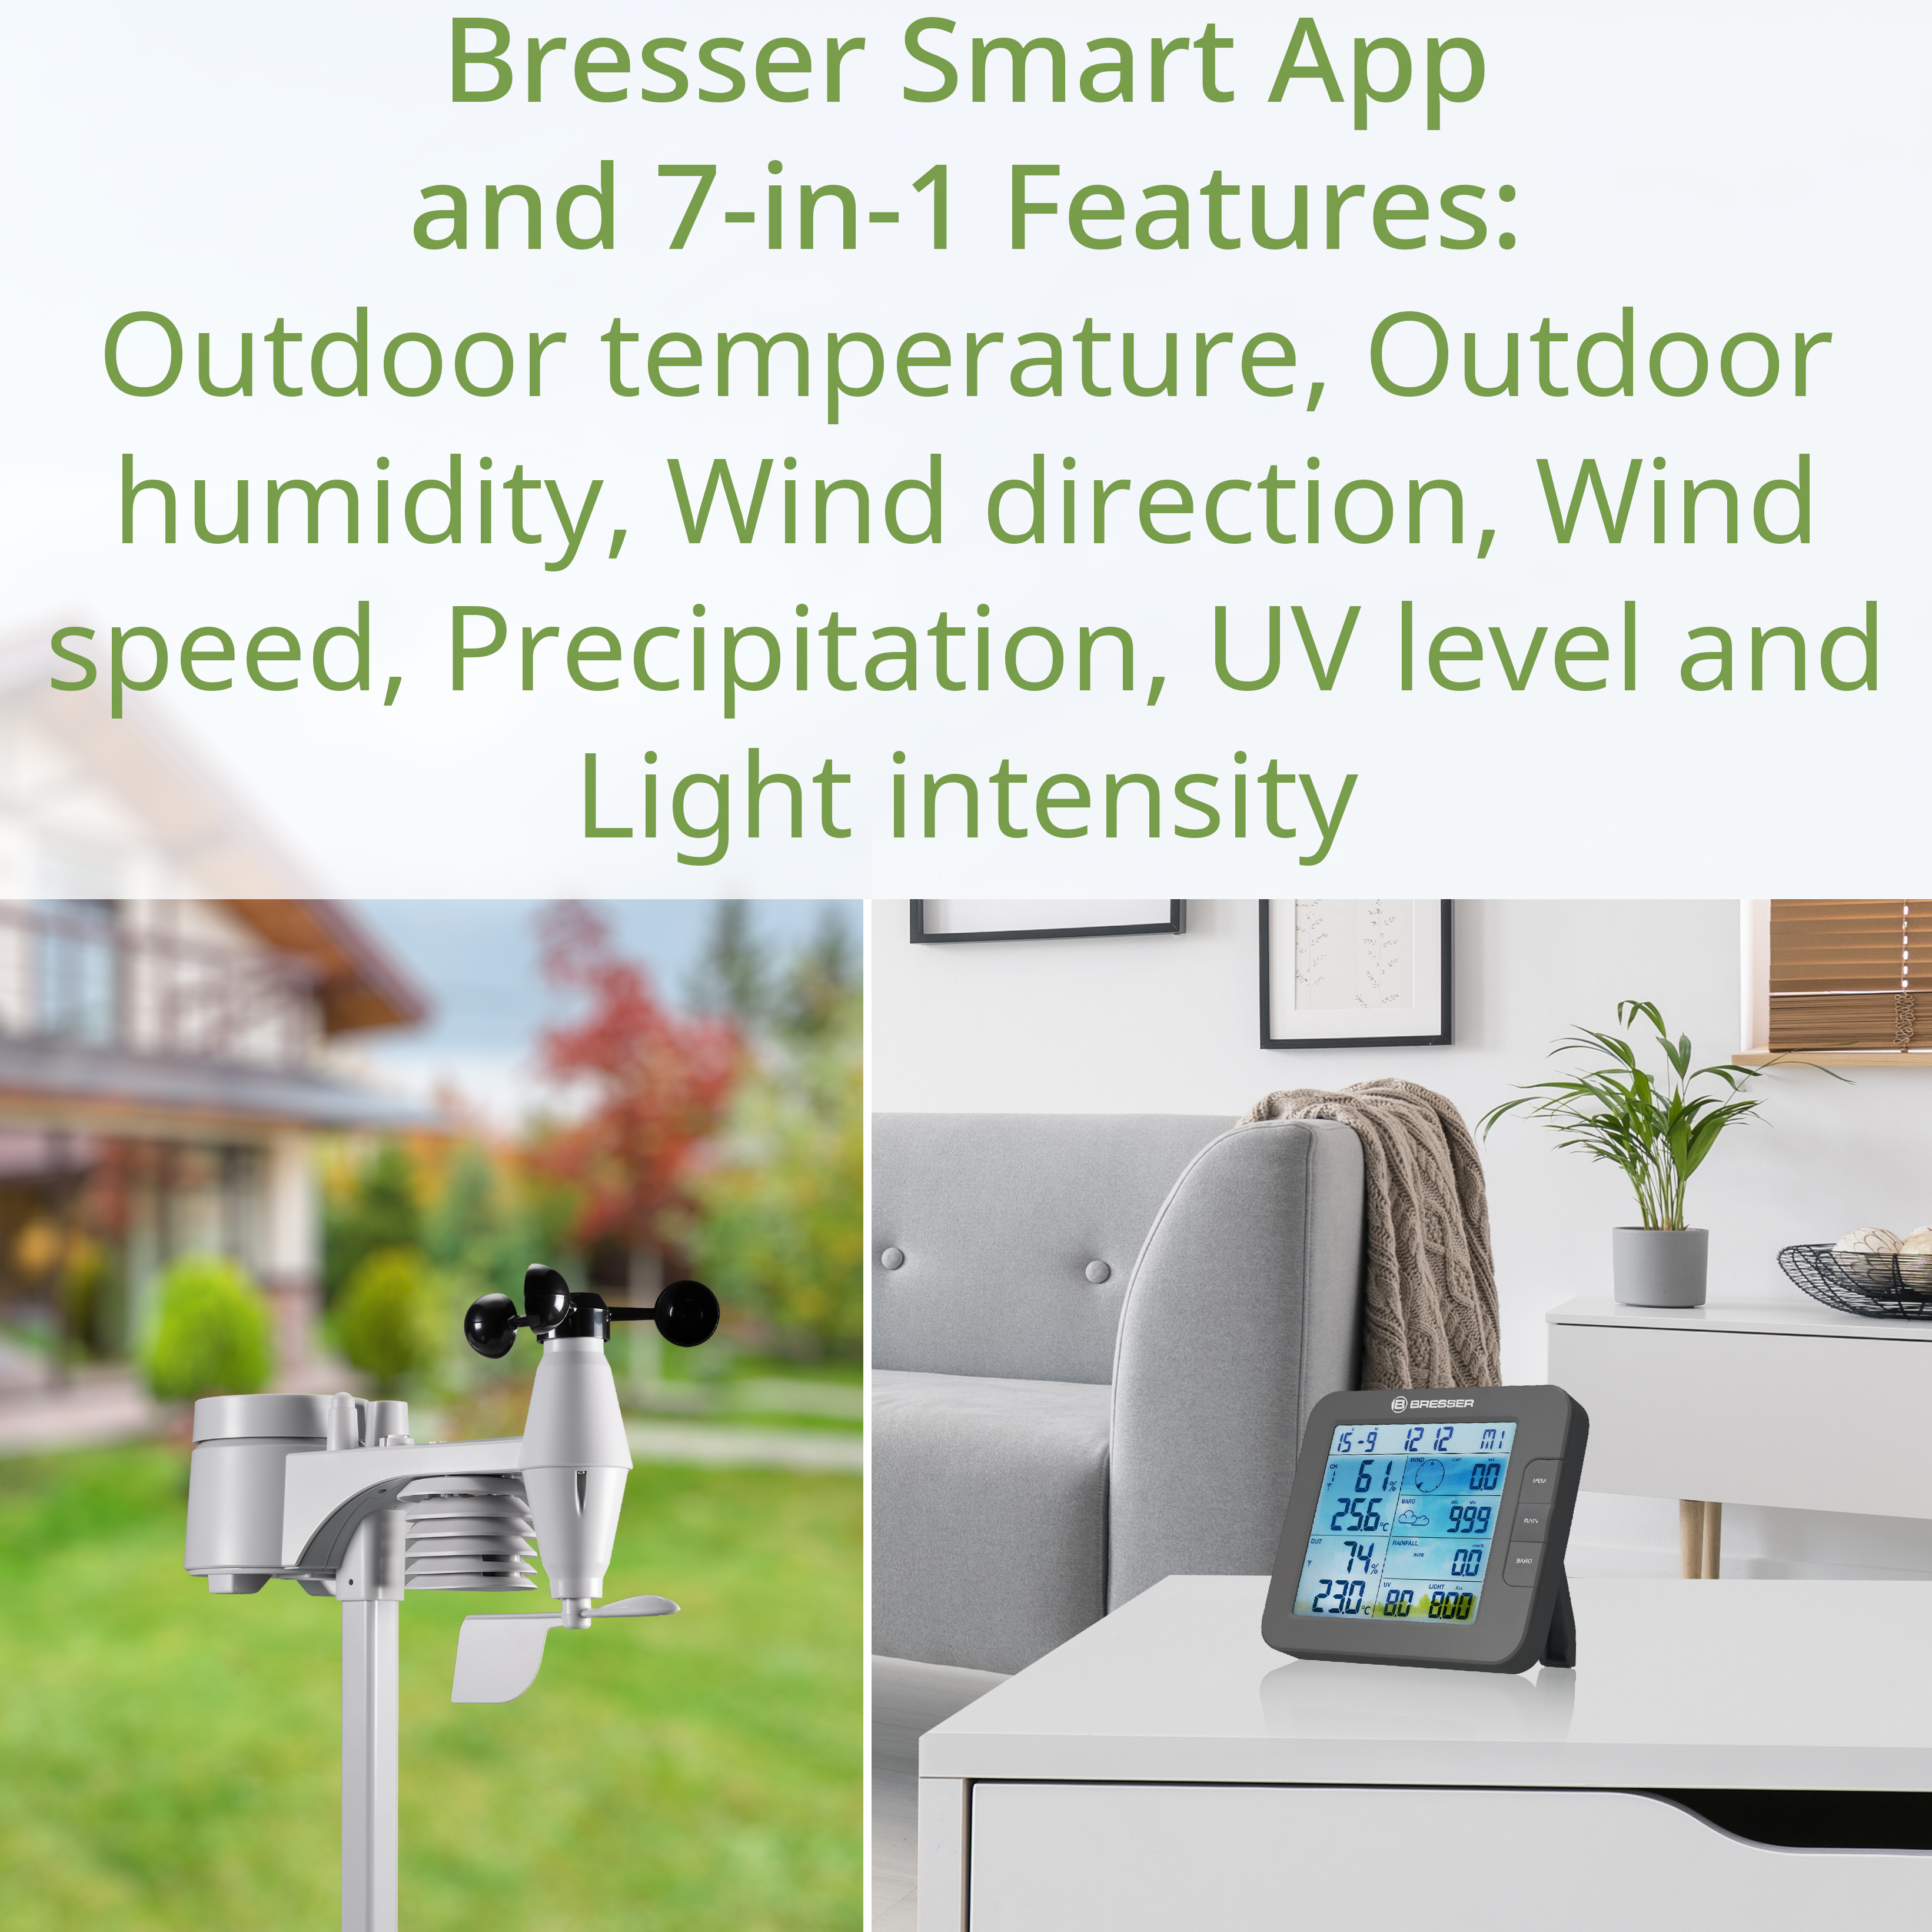 BRESSER 7-in-1 ClimateConnect Tuya Smart Home Weather Station